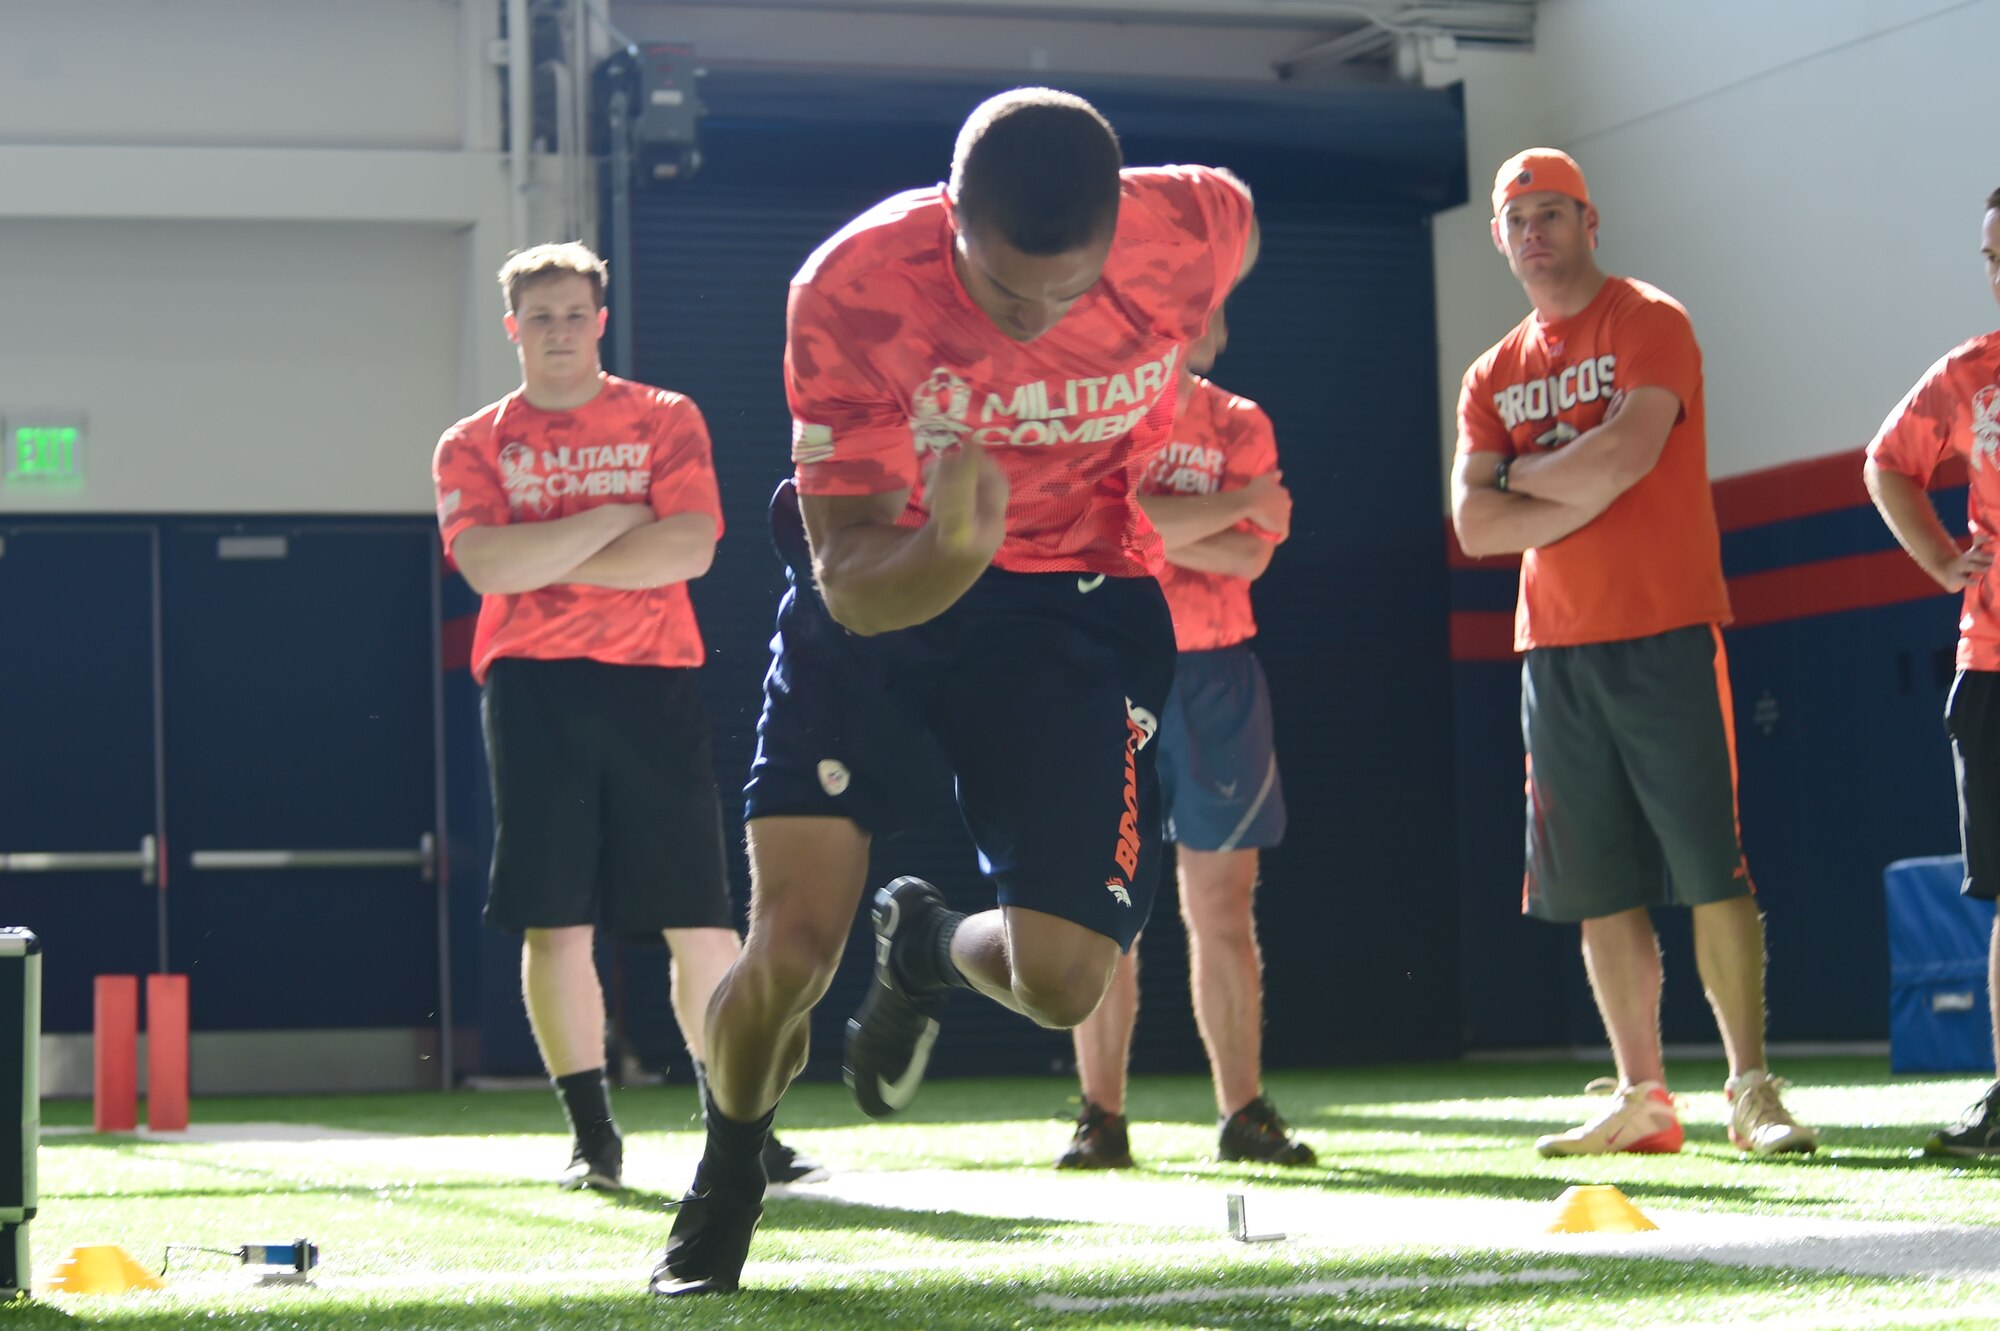 1st Lt. James MacAndrew, 2nd Space Warning Squadron Space Operations Center deputy commander, drives out of his stance during the 40-yard dash portion of the combine Aug. 7, 2015, at the Denver Broncos Headquarters Facility at Dove Valley in Denver. MacAndrew outperformed every competitor at the combine highlighted with a 4.7 second 40-yard dash and lifting 185 pounds on the bench press 28 times. His efforts won him tickets to a Broncos regular season home game along with field passes. (U.S. Air Force photo by Airman 1st Class Luke W. Nowakowski/Released)